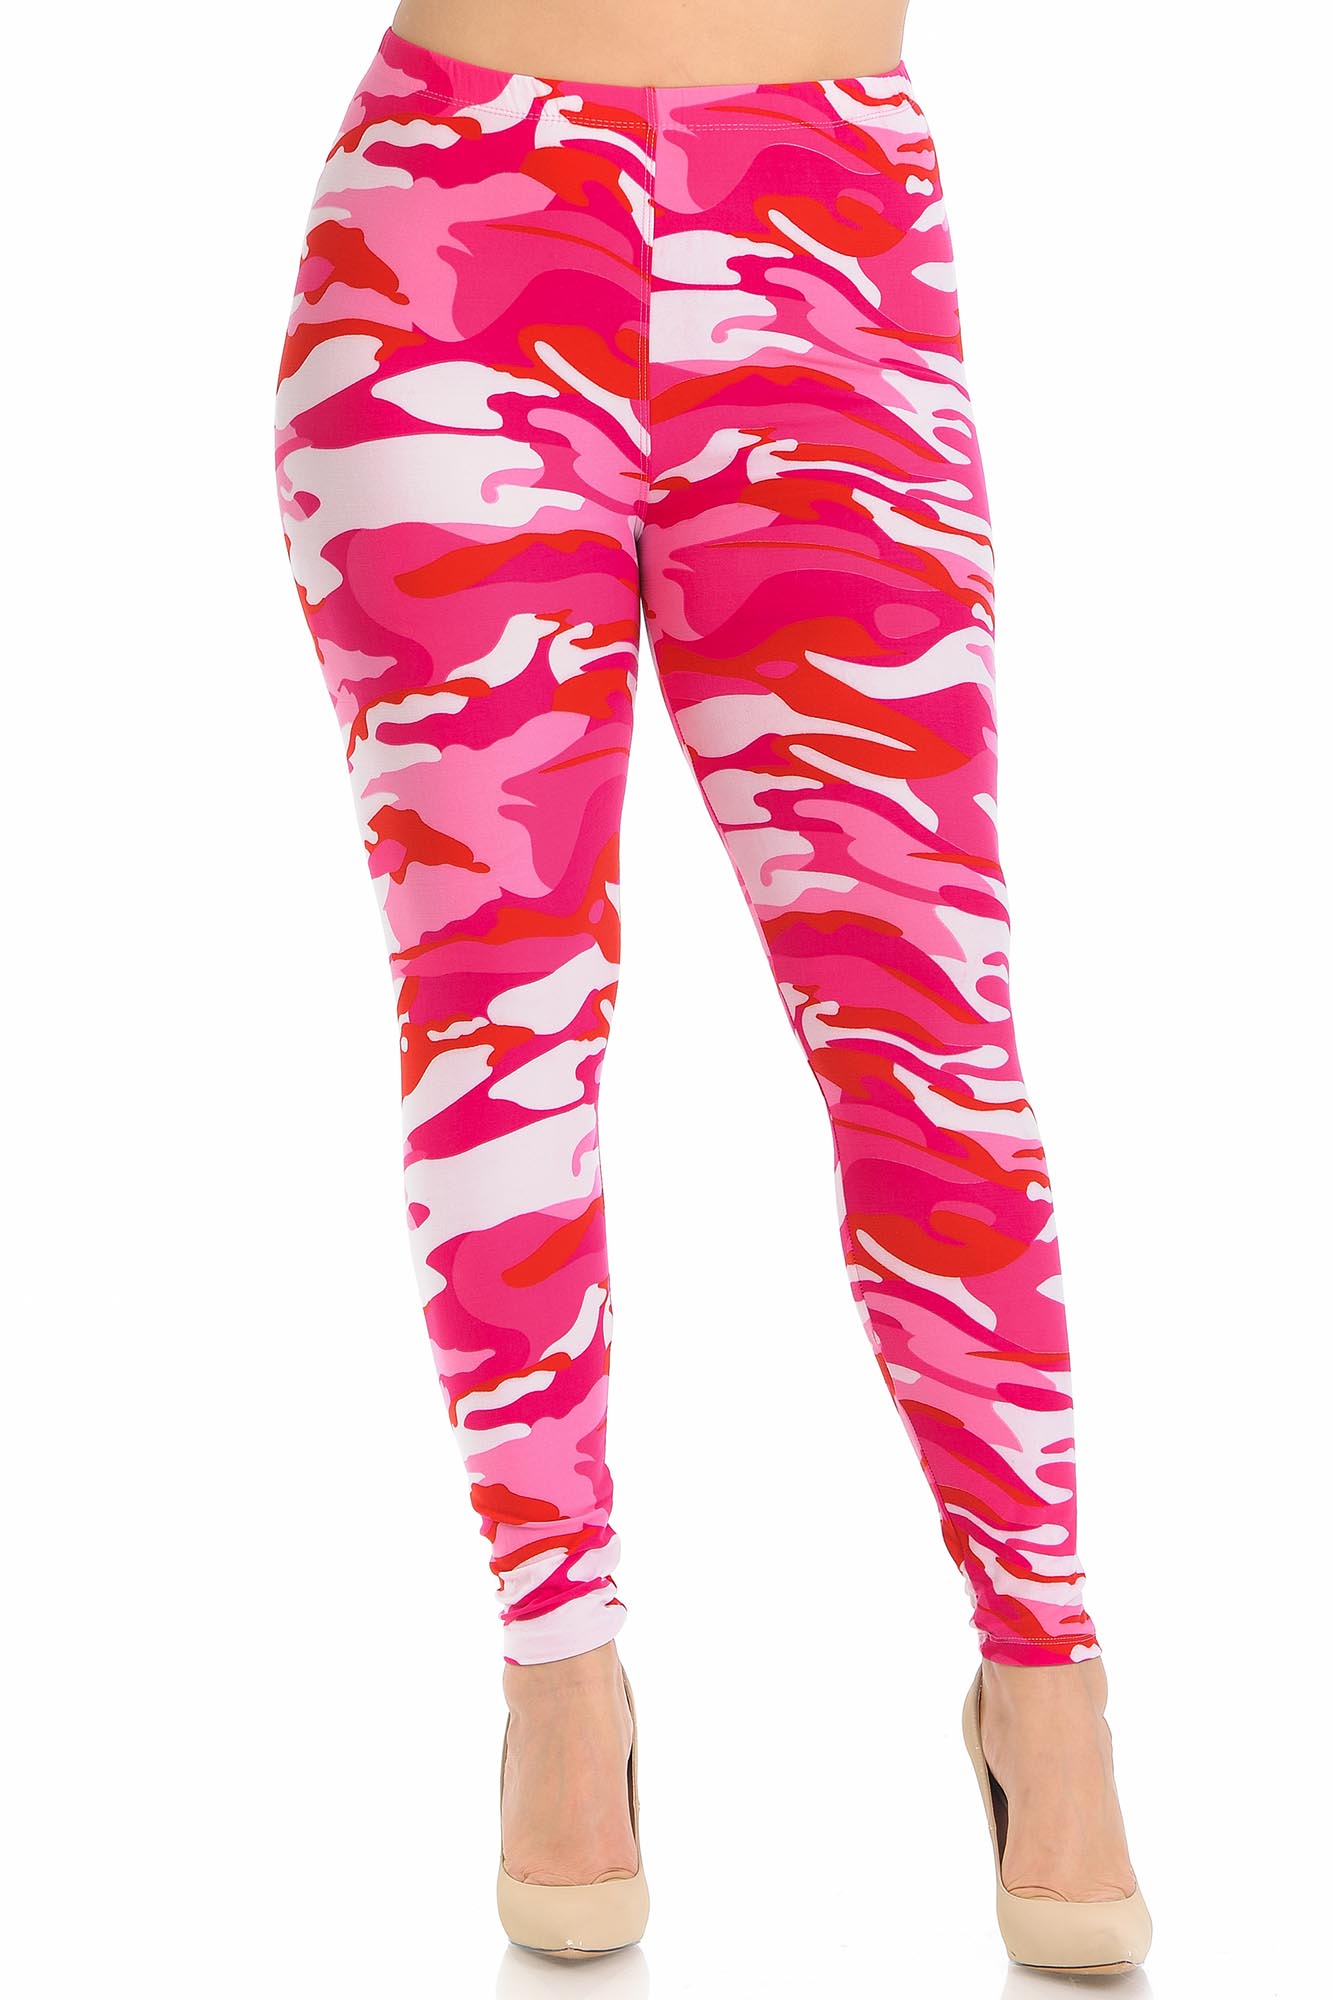 Wholesale Buttery Smooth Pink Camouflage Plus Size Leggings - EEVEE